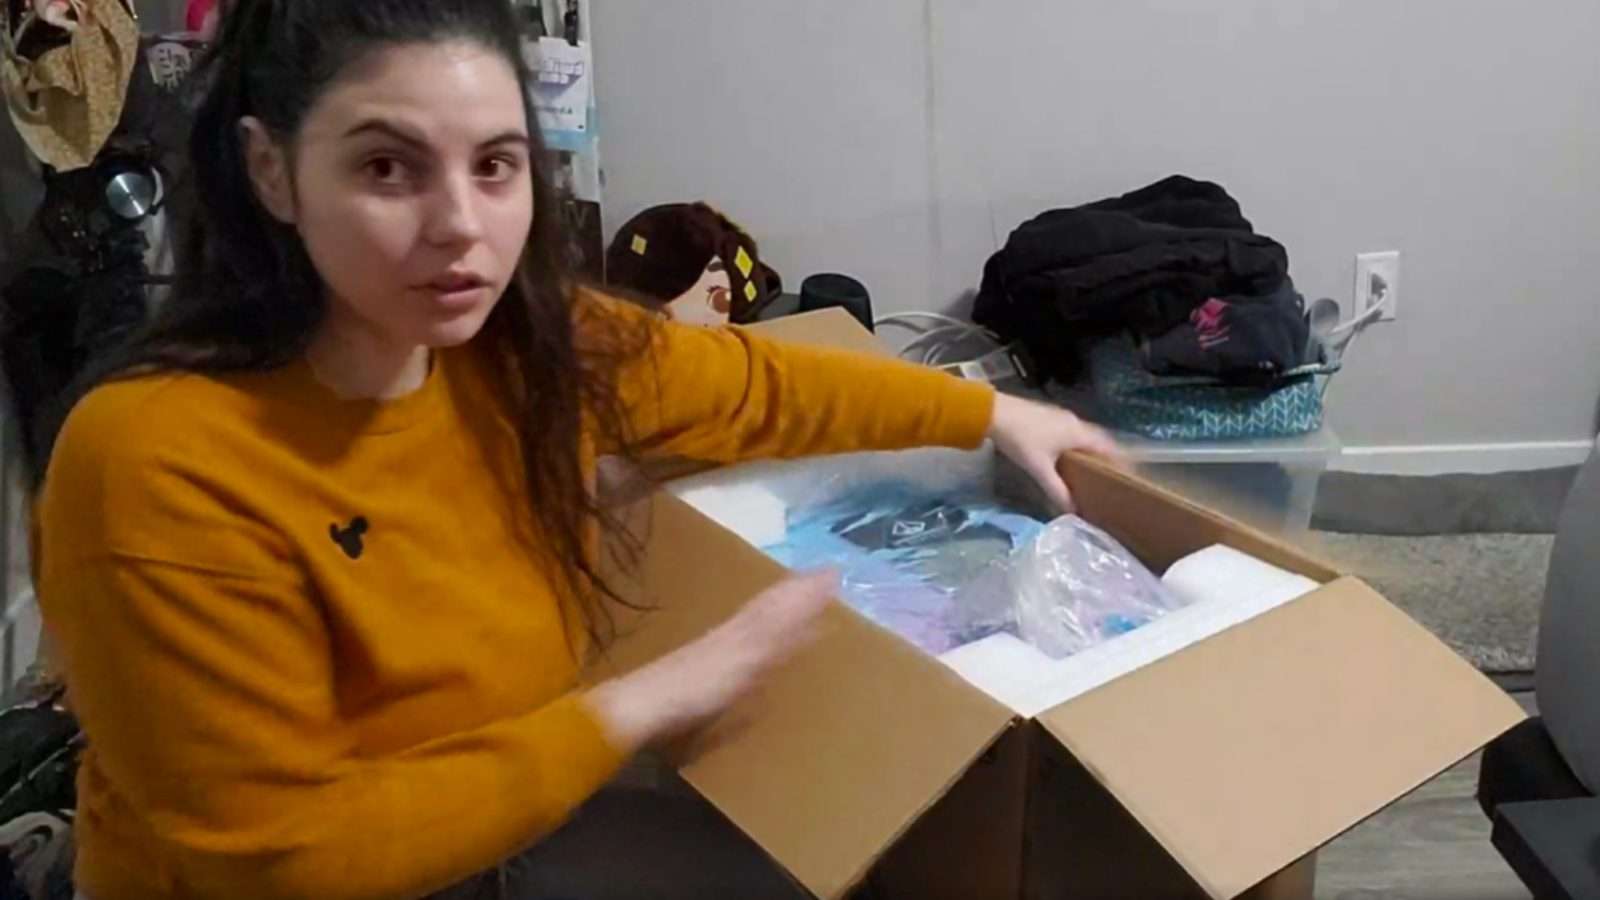 Twitch streamer Aikobliss unboxing her new PC on stream.